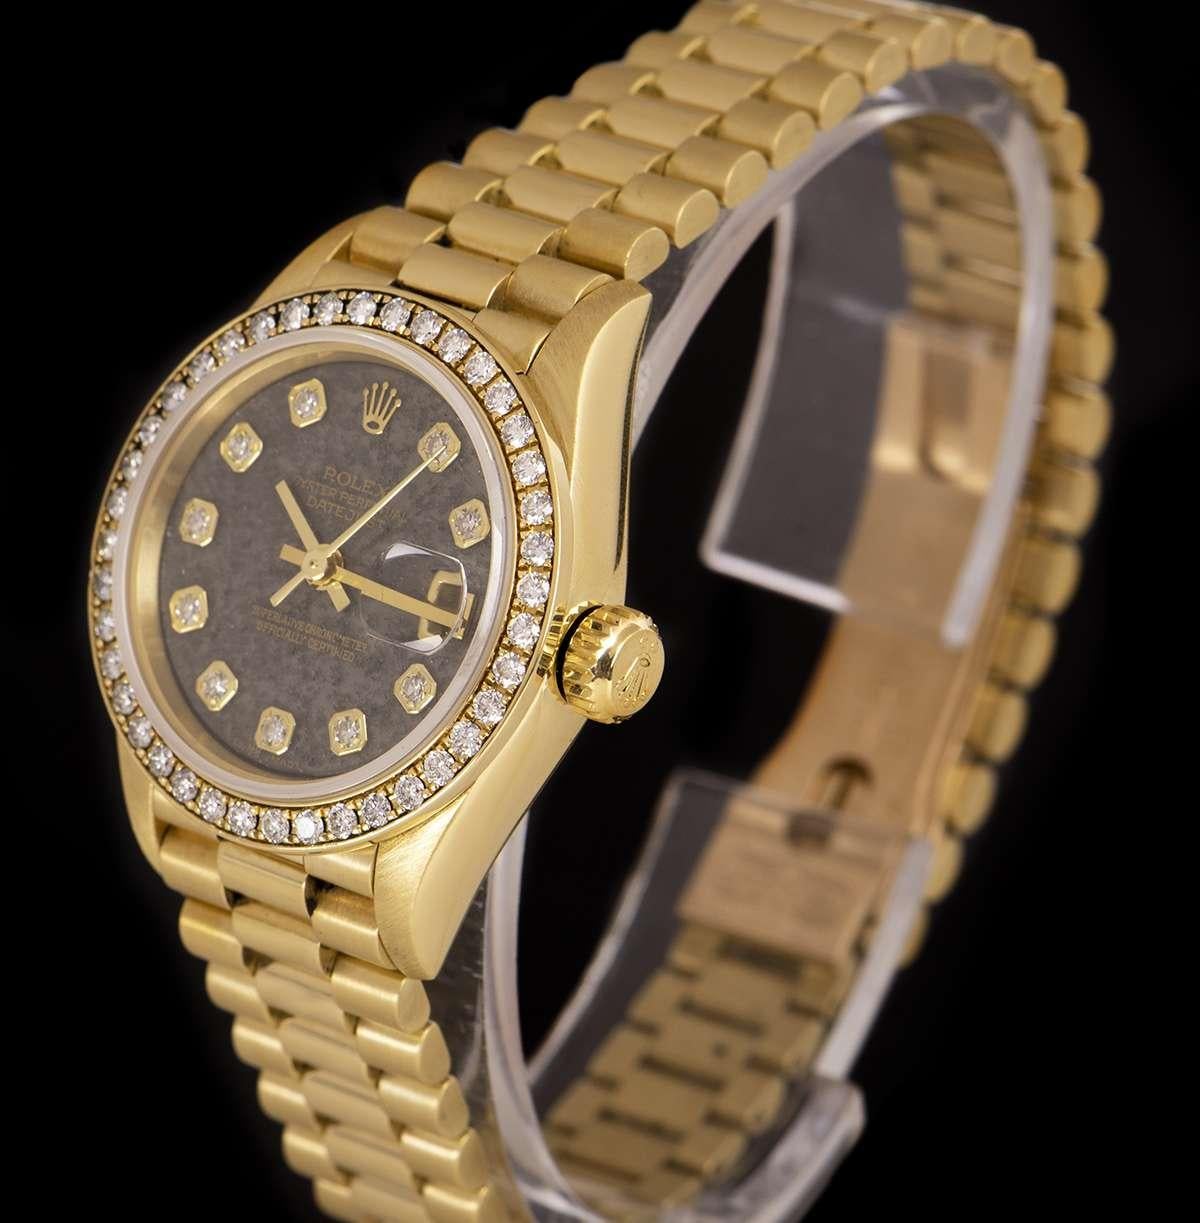 A 1994 18k Yellow Gold Oyster Perpetual Datejust Ladies Wristwatch, rare ammonite dial set with 10 applied round brilliant cut diamond hour markers, date at 3 0'clock, a fixed 18k yellow gold bezel set with approximately 40 round brilliant cut